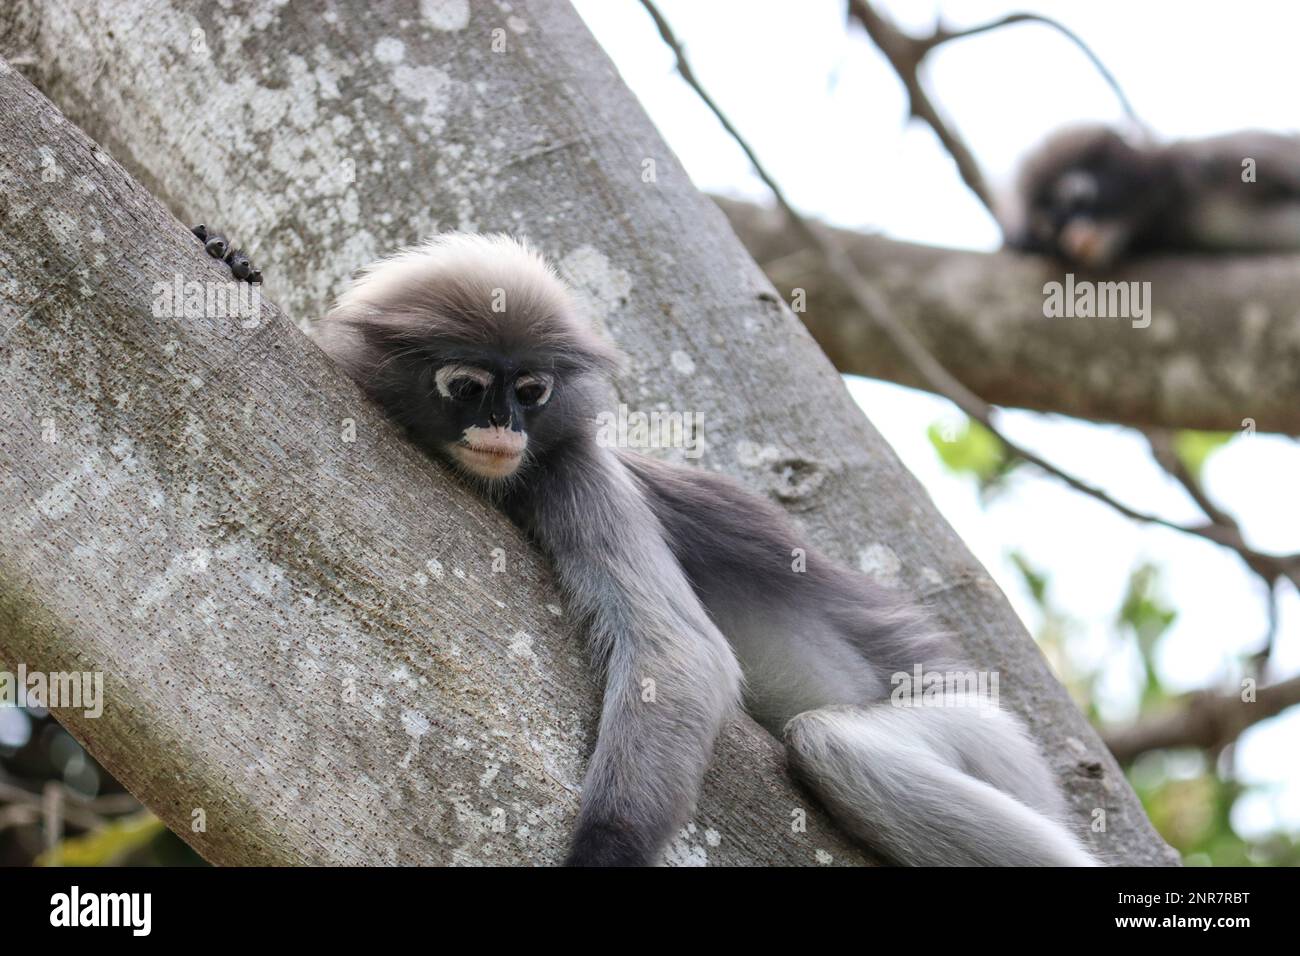 Cute adult dusky leaf monkey (Trachypithecus obscurus) sits on a tree waiting for a treat from people. Stock Photo